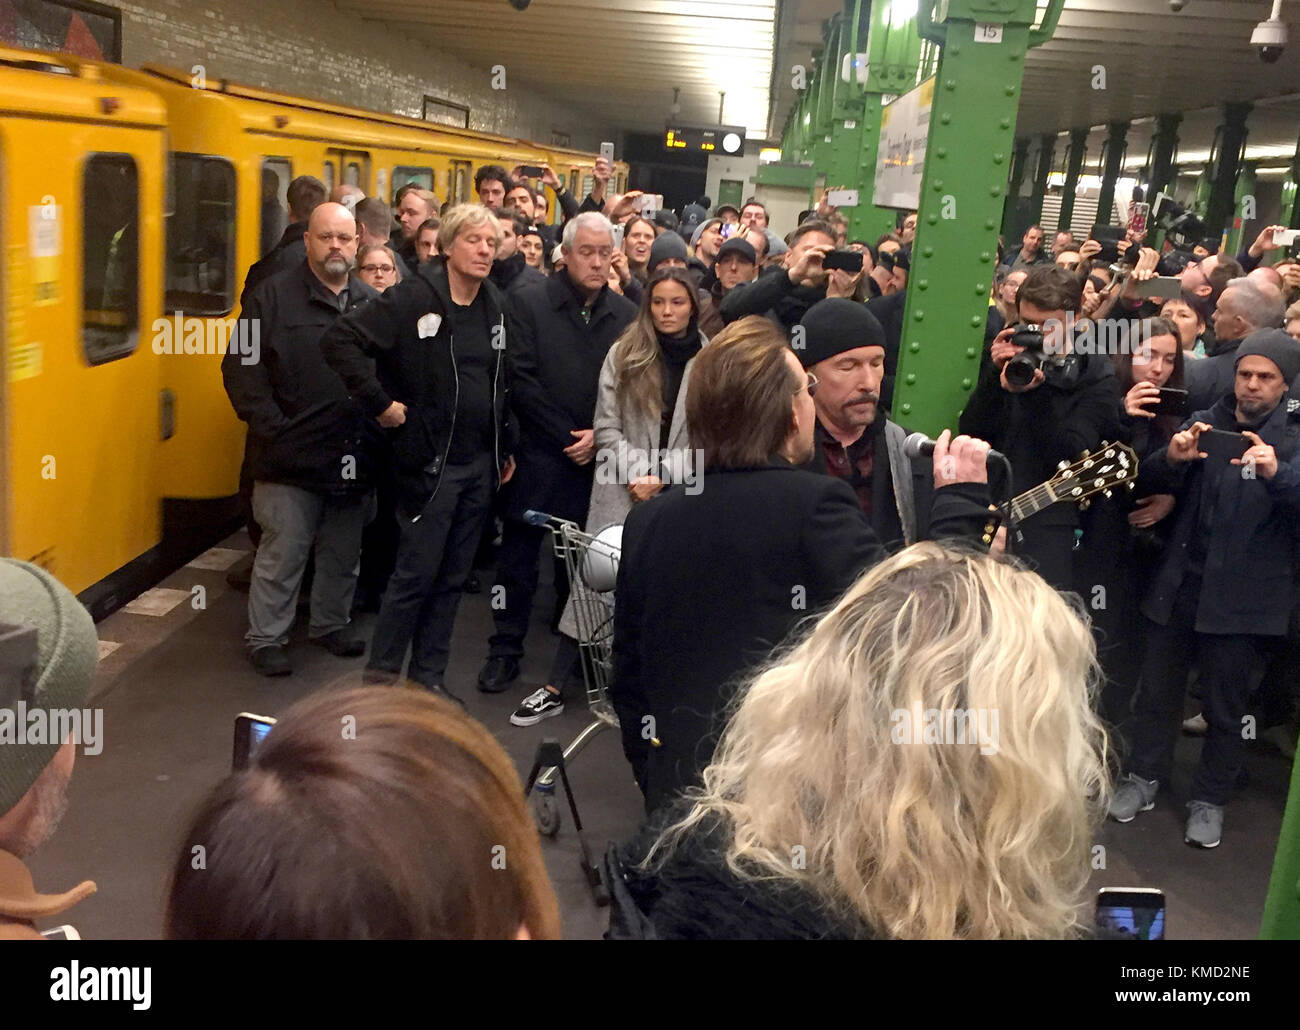 Berlin, Germany. 06th Dec, 2017. HANDOUT - The handout made available shows singer Bono (C, front) and guitar player David Howell Evans 'The Edge' (C, back) of the band U2 standing n an underground platform of the U2 line in Berlin, Germany, 06 December 2017. The band performed a concert at the underground station. (ATTENTION EDITORS: FOR EDITORIAL USE ONLY IN CONNECTION WITH CURRENT REPORTING/ MANDATORY CREDIT) Credit: Anja Caspary/Radioeins/dpa/Alamy Live News Stock Photo